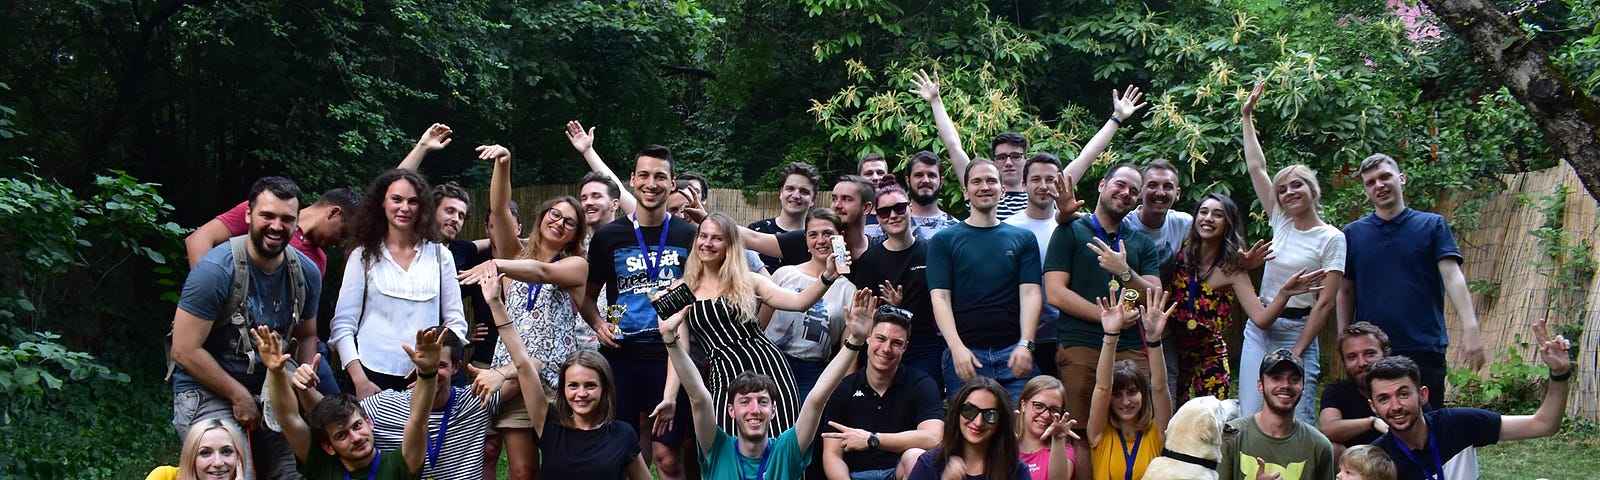 Wolfpack Digital team, group picture at Summer Olympics 2019